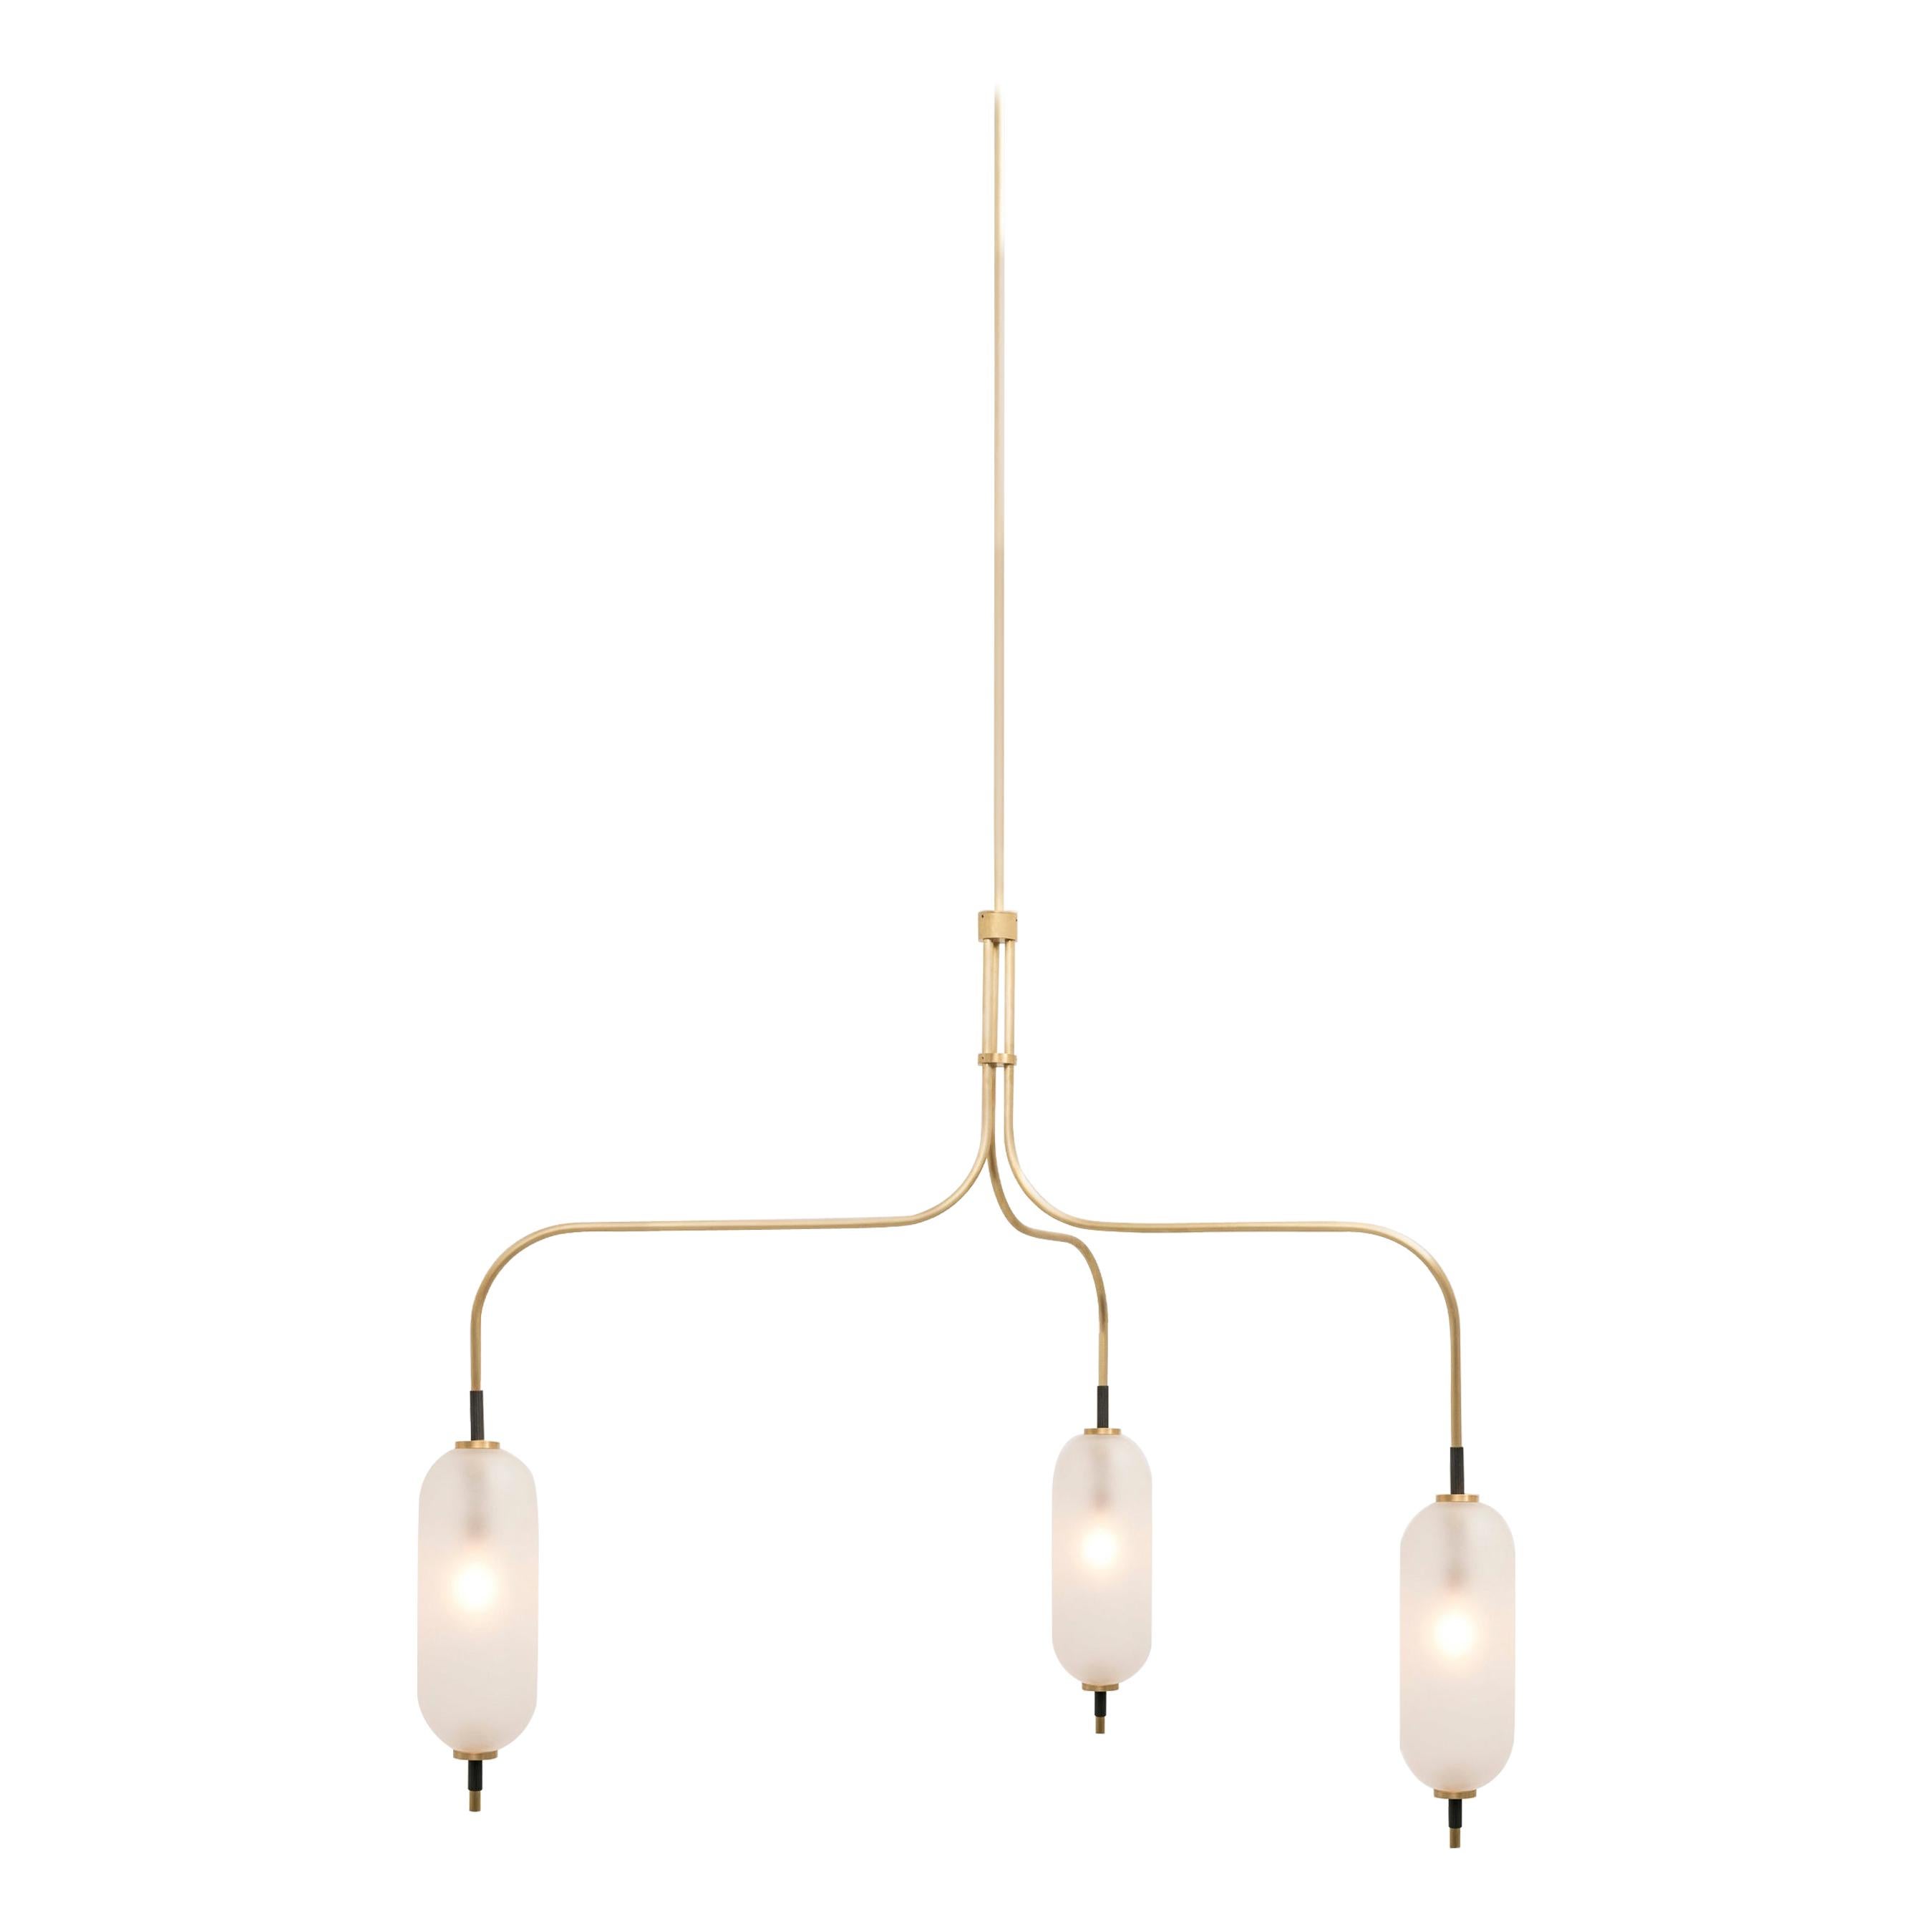 Pierce Chandelier with Hand Blown Glass Shade and Brushed Brass Stem